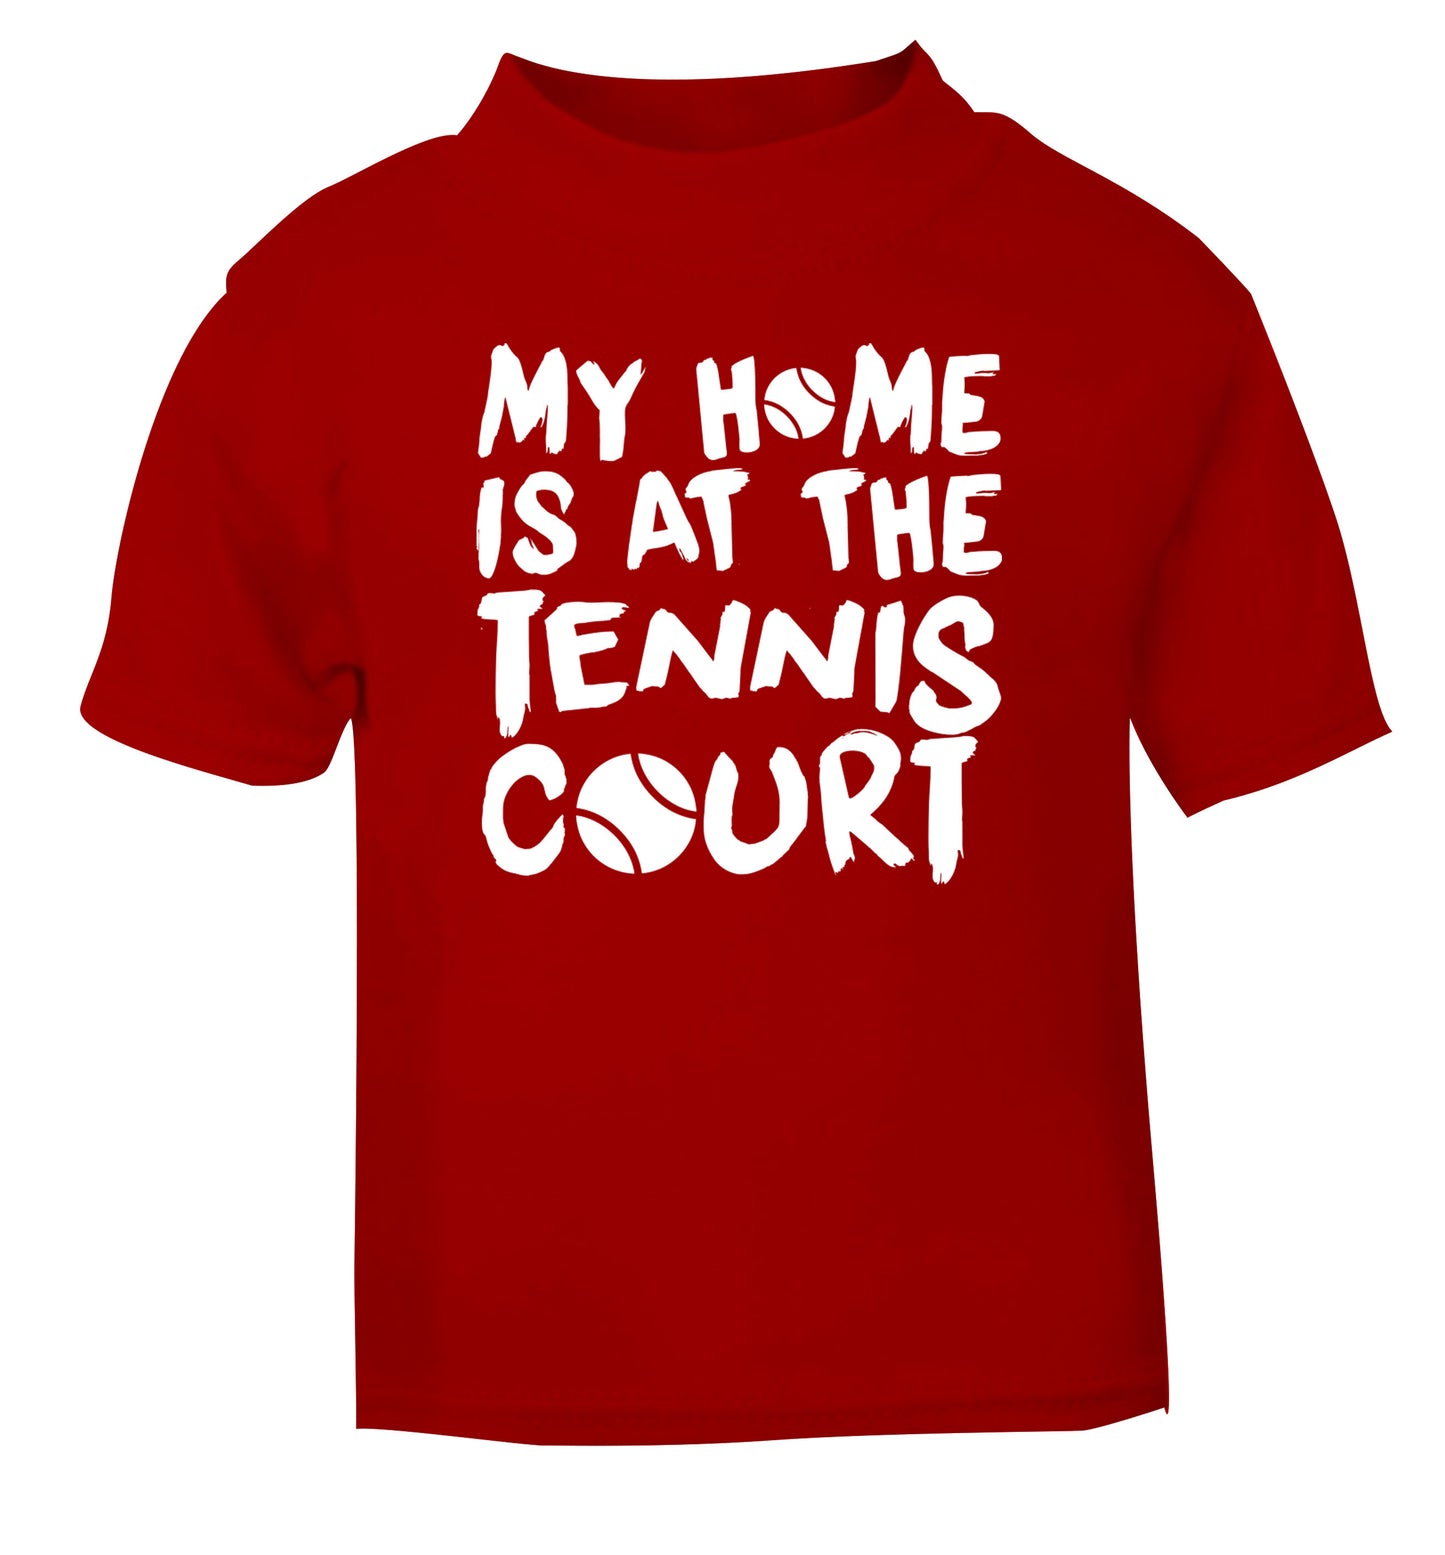 My home is at the tennis court red Baby Toddler Tshirt 2 Years